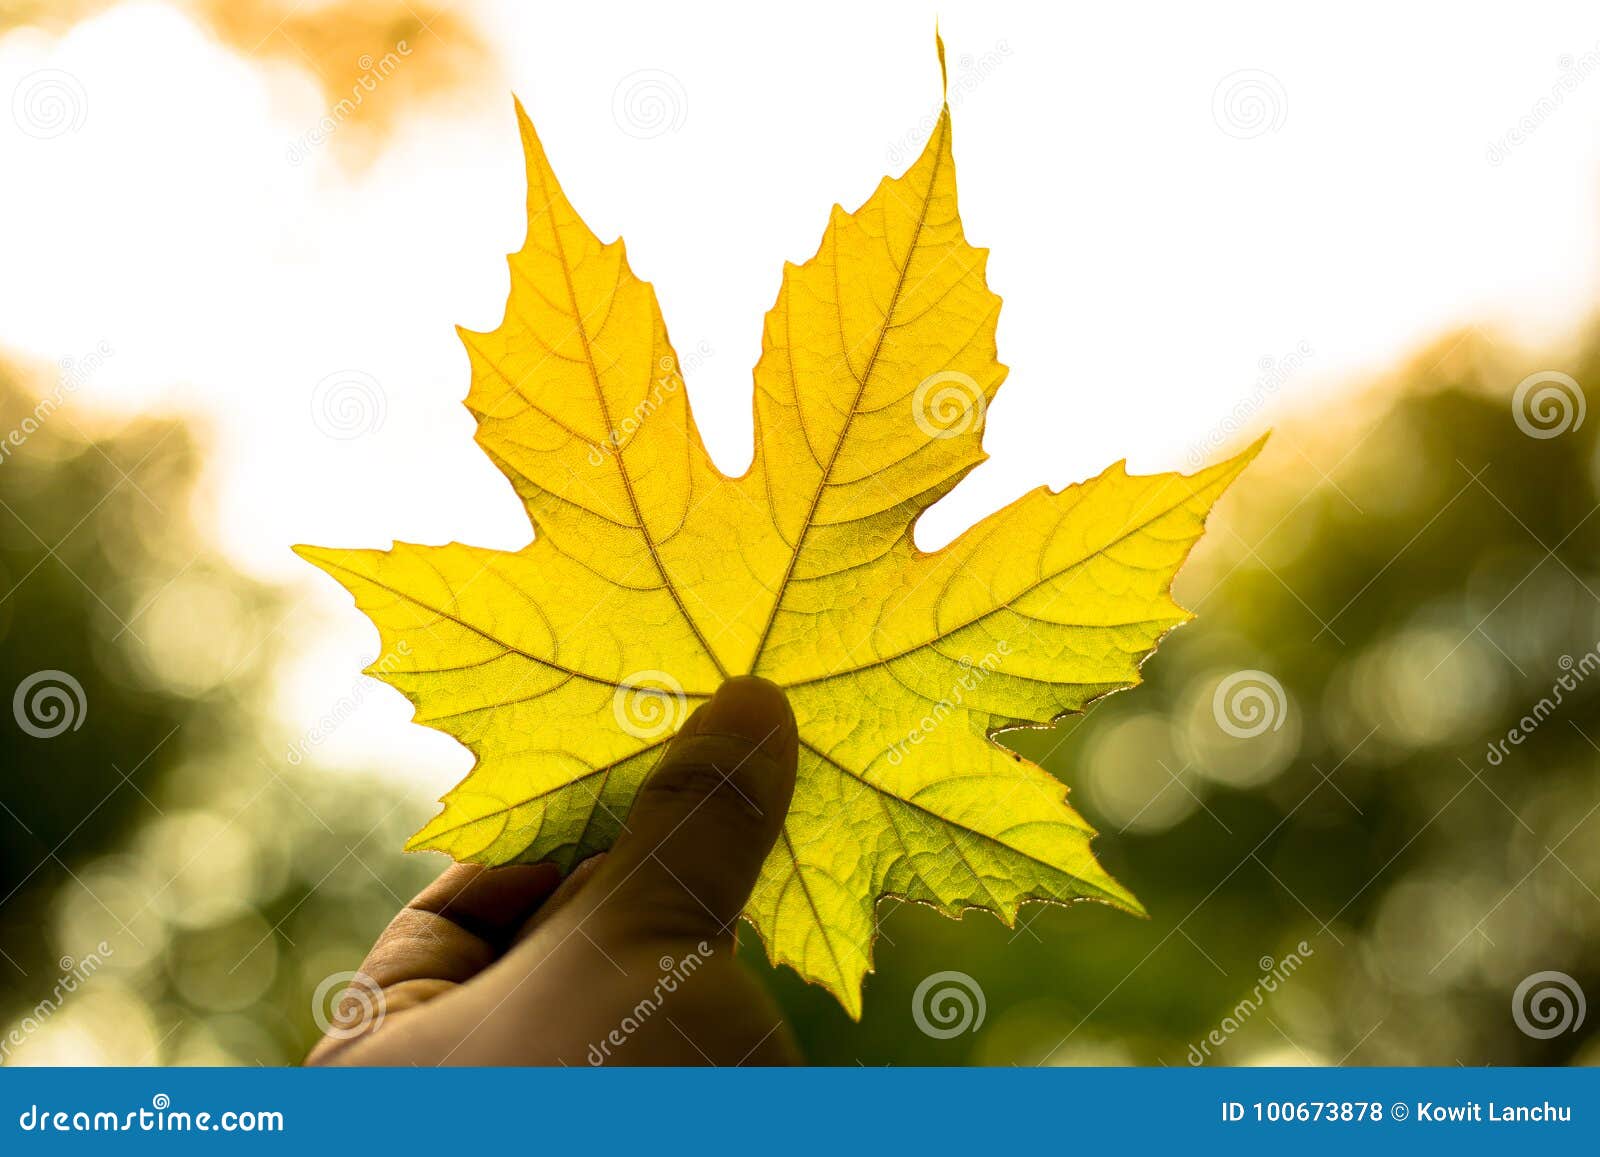 A Hand Holding a Green Leaf Stock Photo - Image of park, season: 100673878